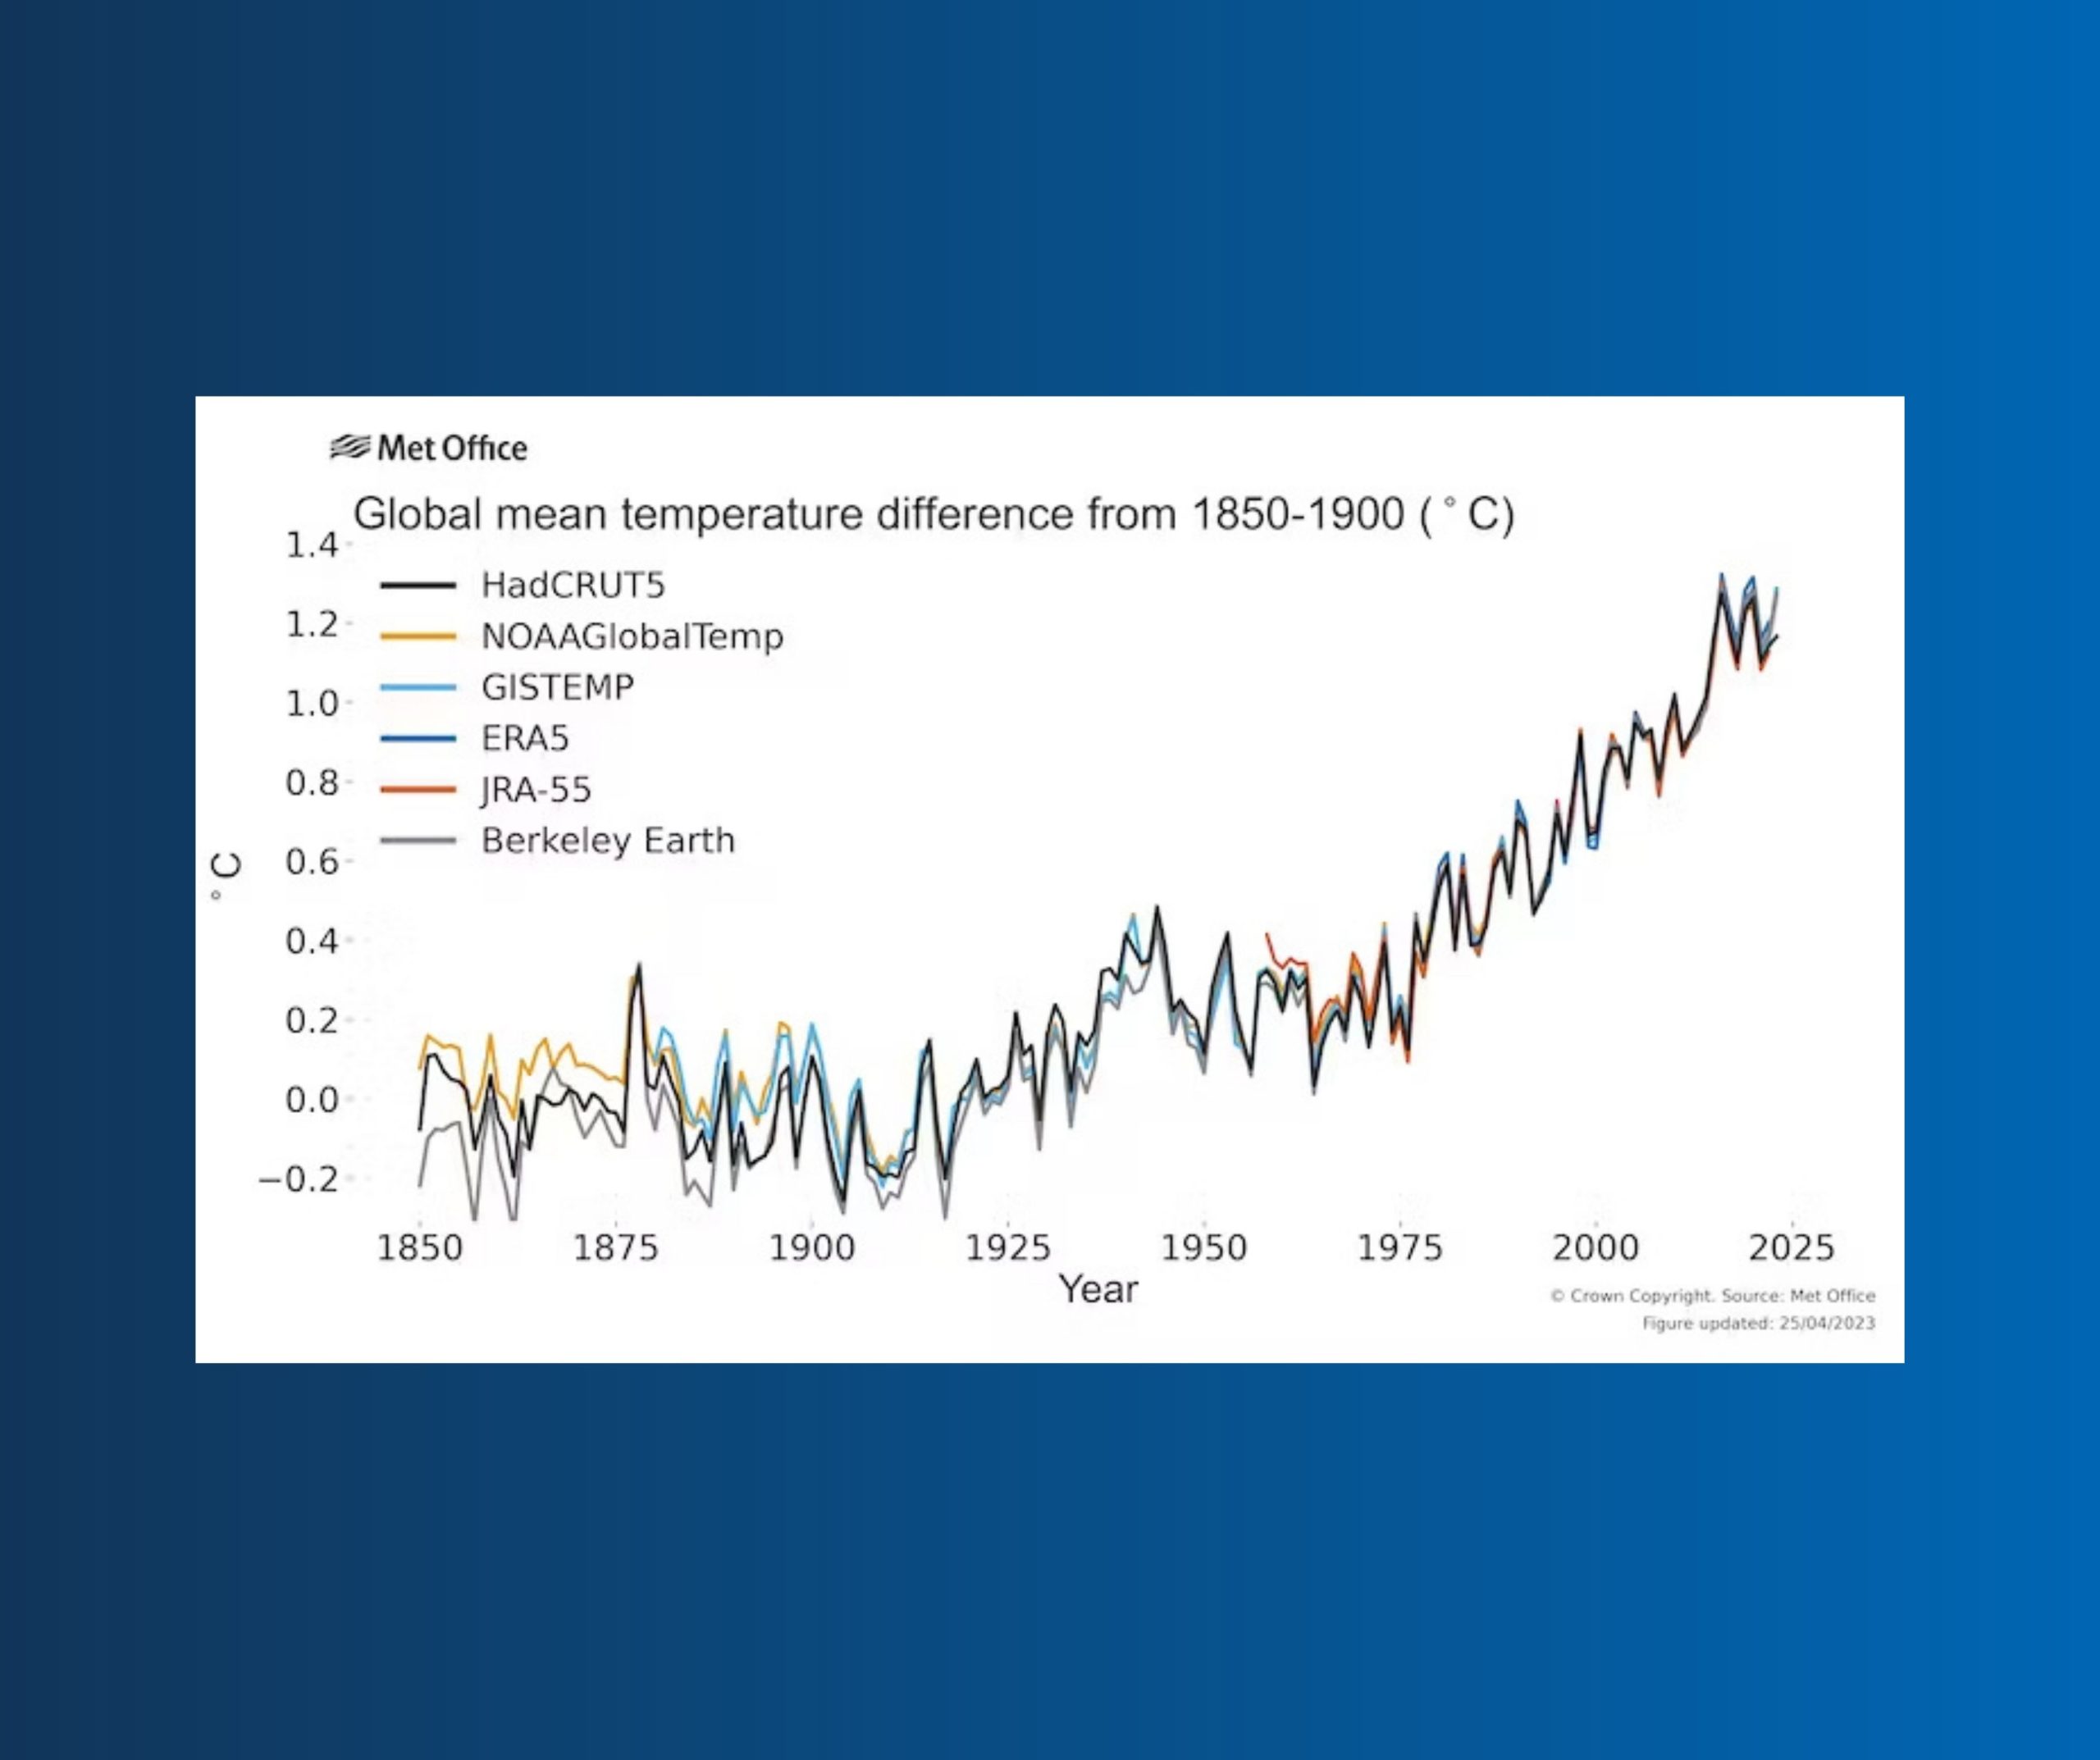 Global warming to bring record hot year by 2028 – probably our first above 1.5°C limit